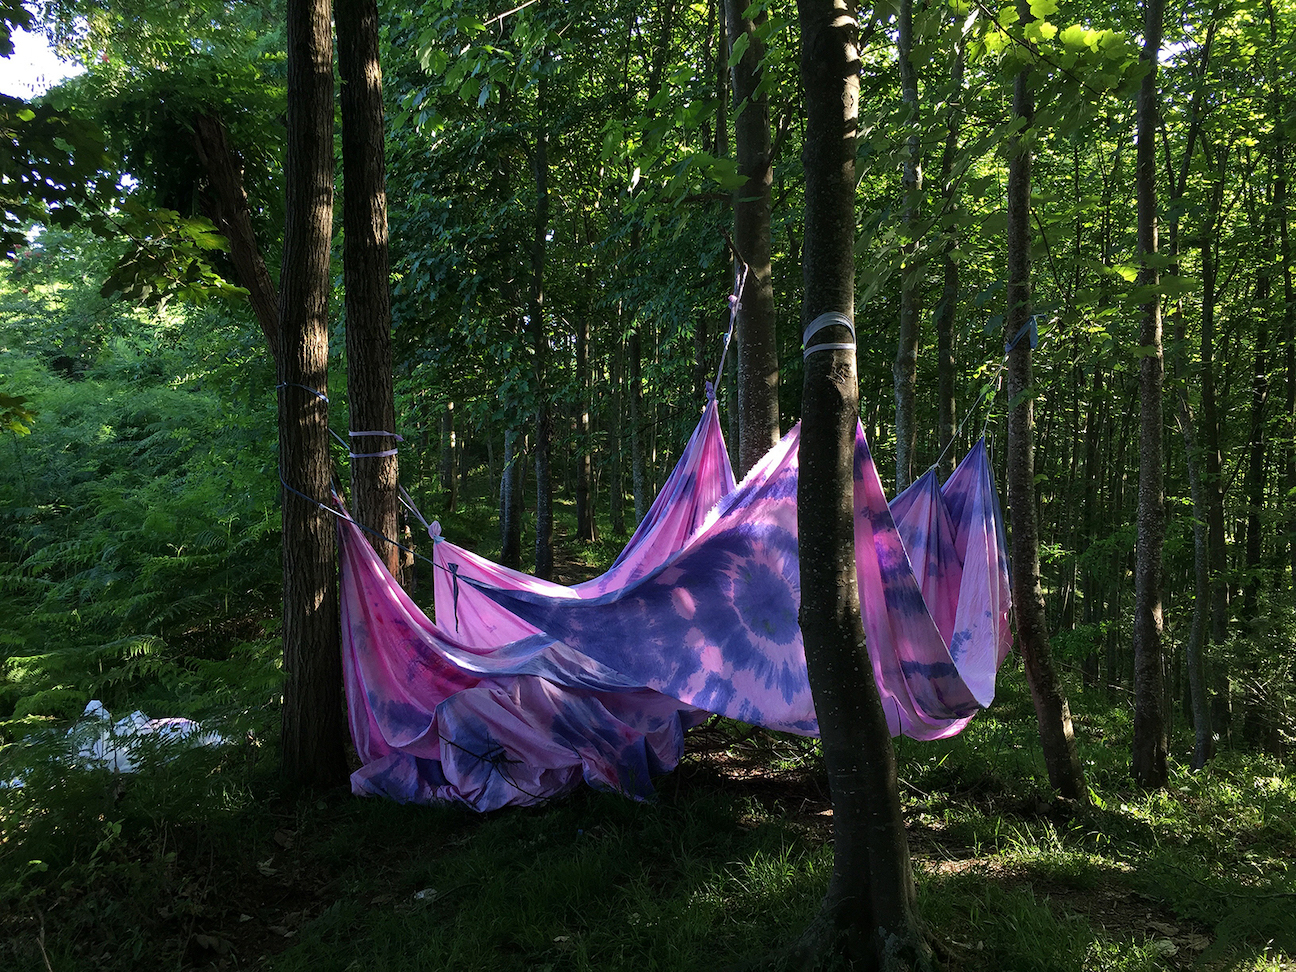 Becoming landscape in a landscape then disappearing, 2018, hand-dyed cotton cloth, site specific